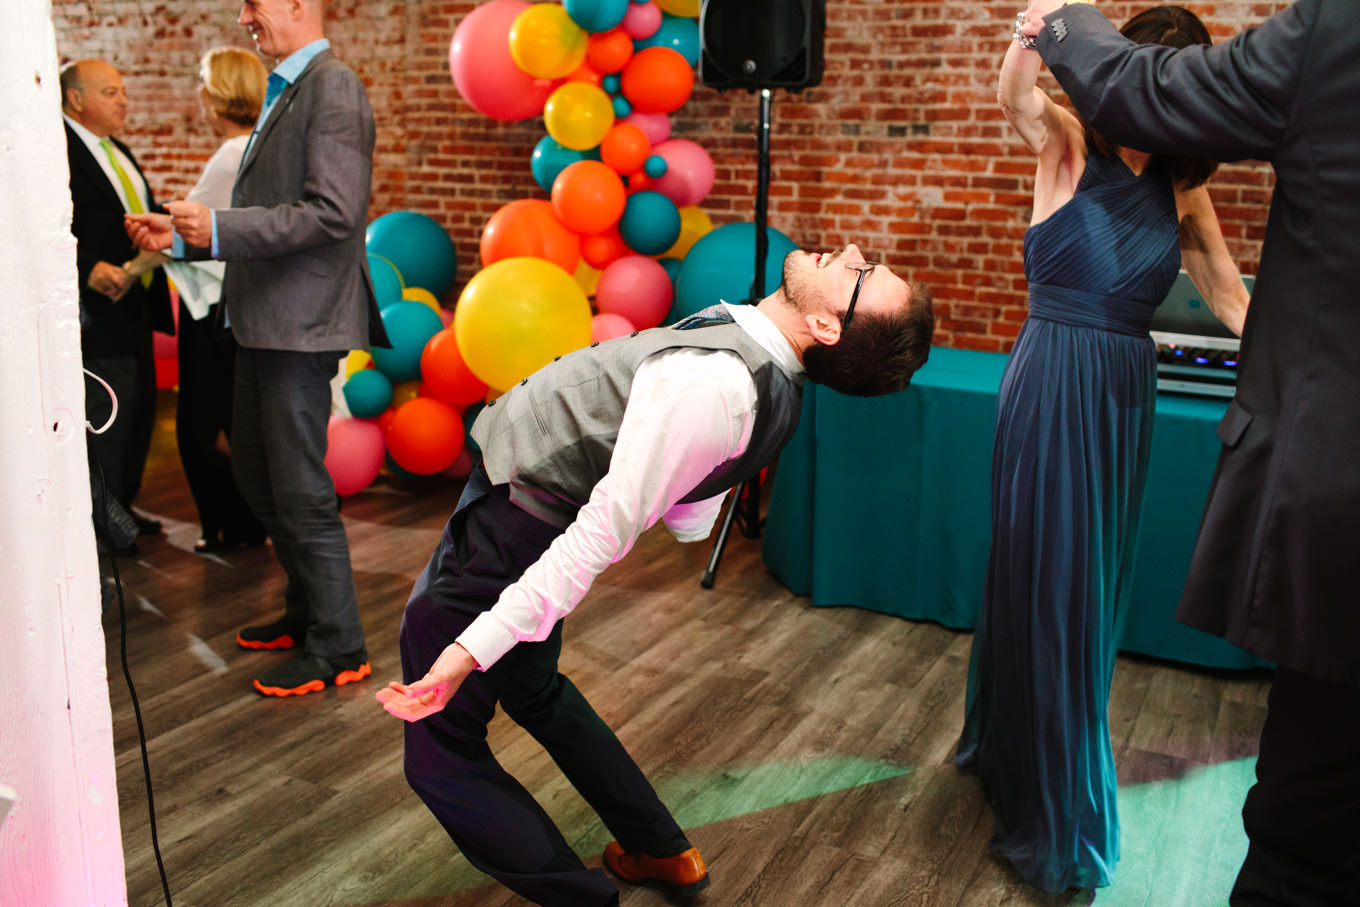 Wedding reception at Unique Space | Colorful wedding at The Unique Space Los Angeles published in The Knot Magazine | Fresh and colorful photography for fun-loving couples in Southern California | #colorfulwedding #losangeleswedding #weddingphotography #uniquespace Source: Mary Costa Photography | Los Angeles